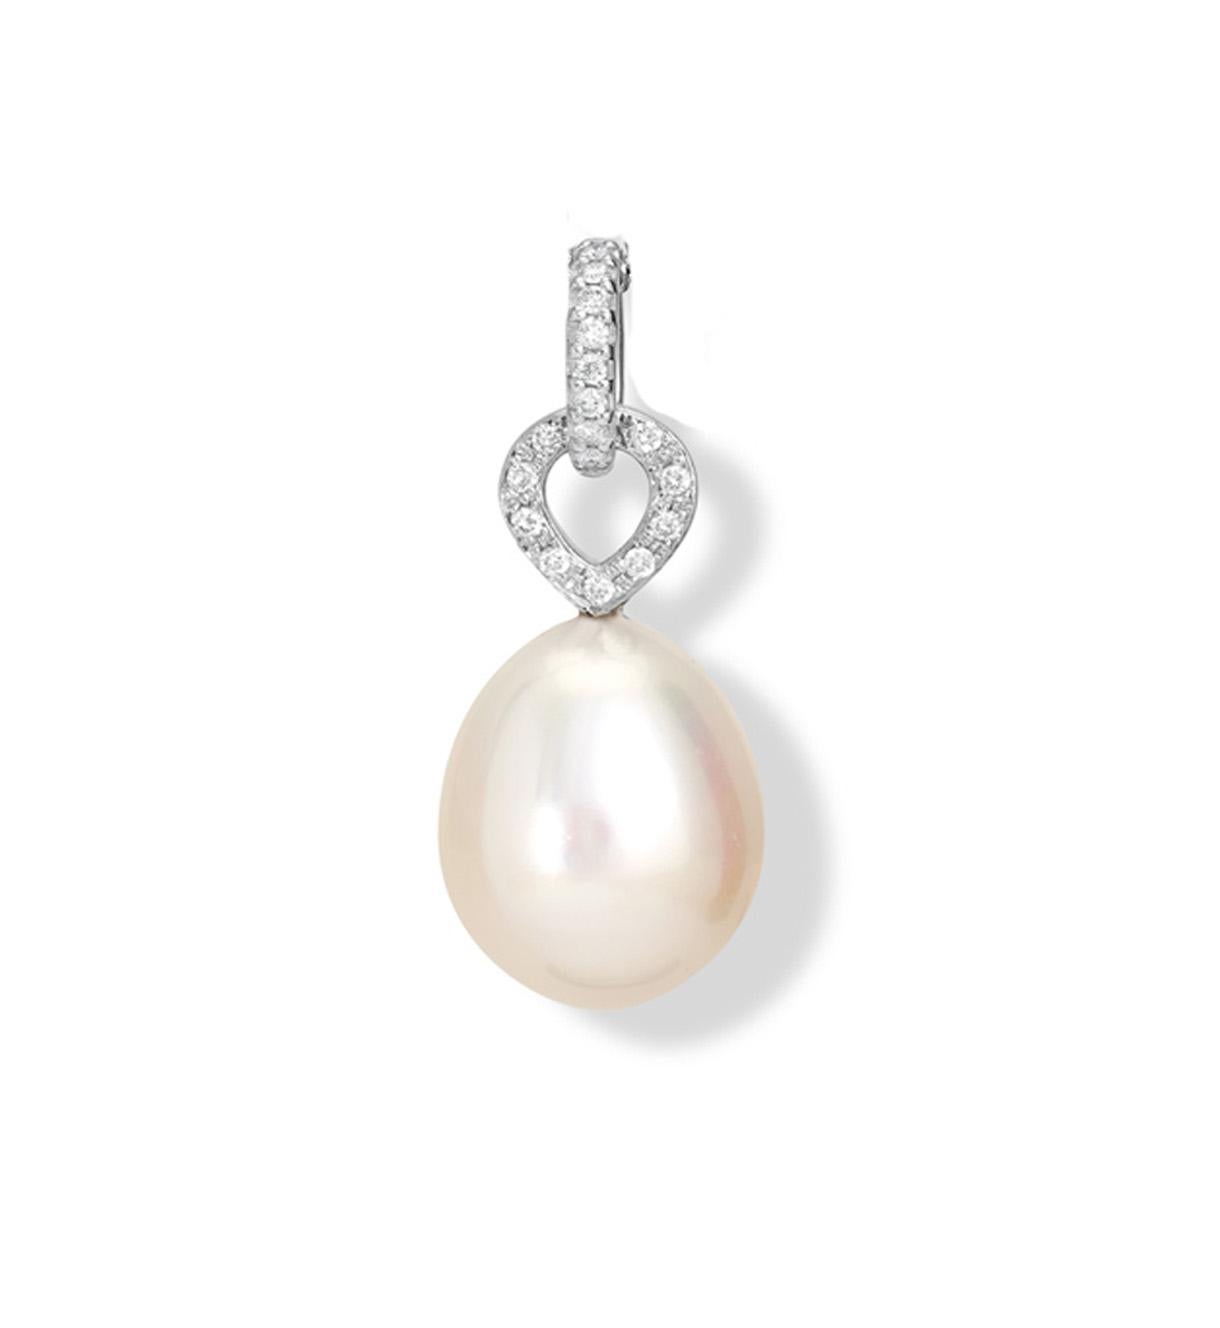 Cassandra Goad Octavia Pearl and Diamond Necklace Pendant In New Condition For Sale In London, GB